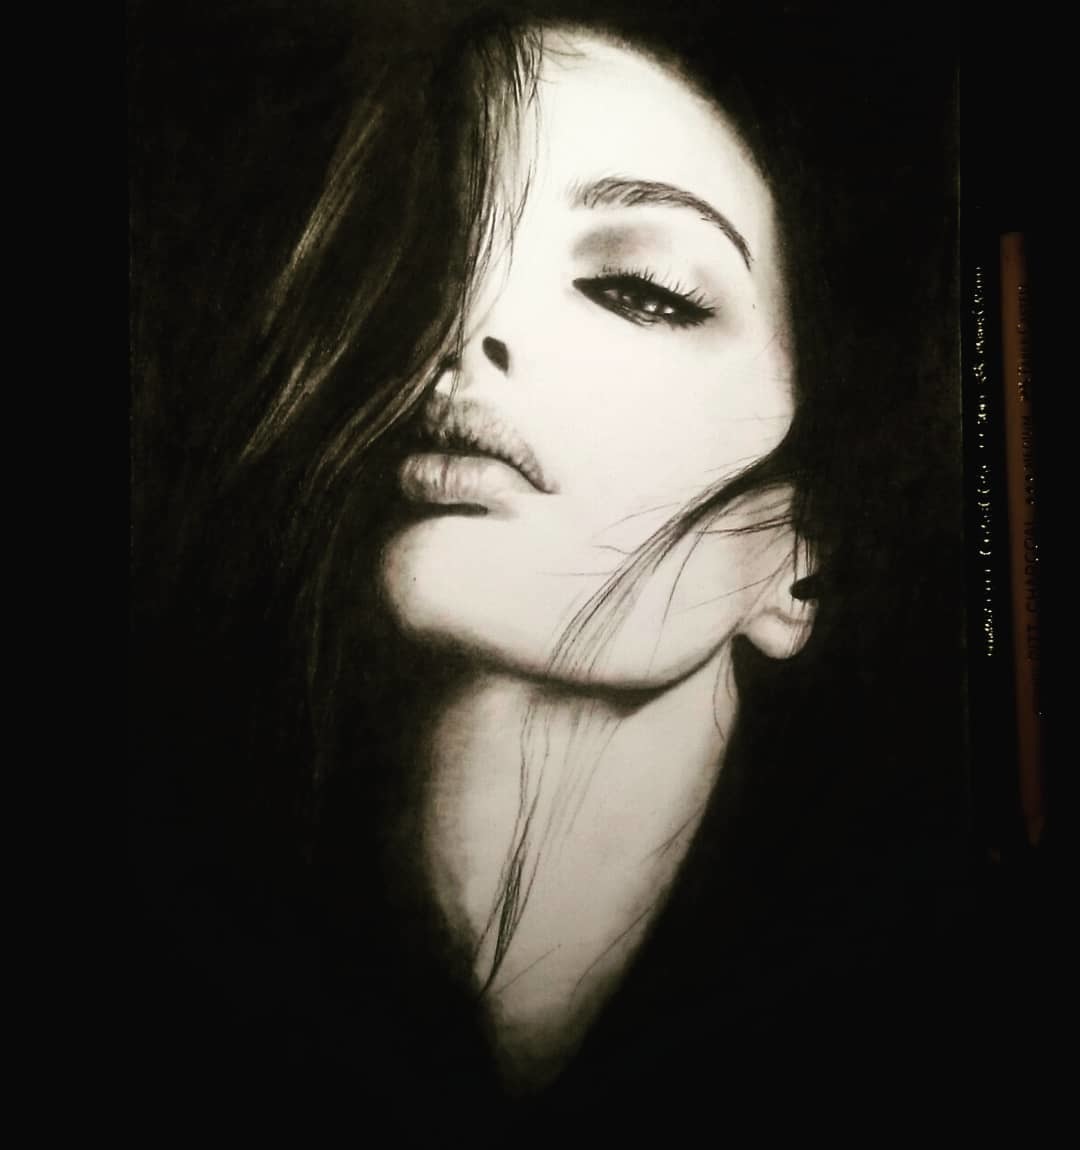 Pencil drawings. And one with oil. Pensils - Charcoal, graphite. - NSFW, My, Art, Pencil drawing, Portrait, Portrait by photo, Coal, Artist, Inspiration, Wish, Longpost